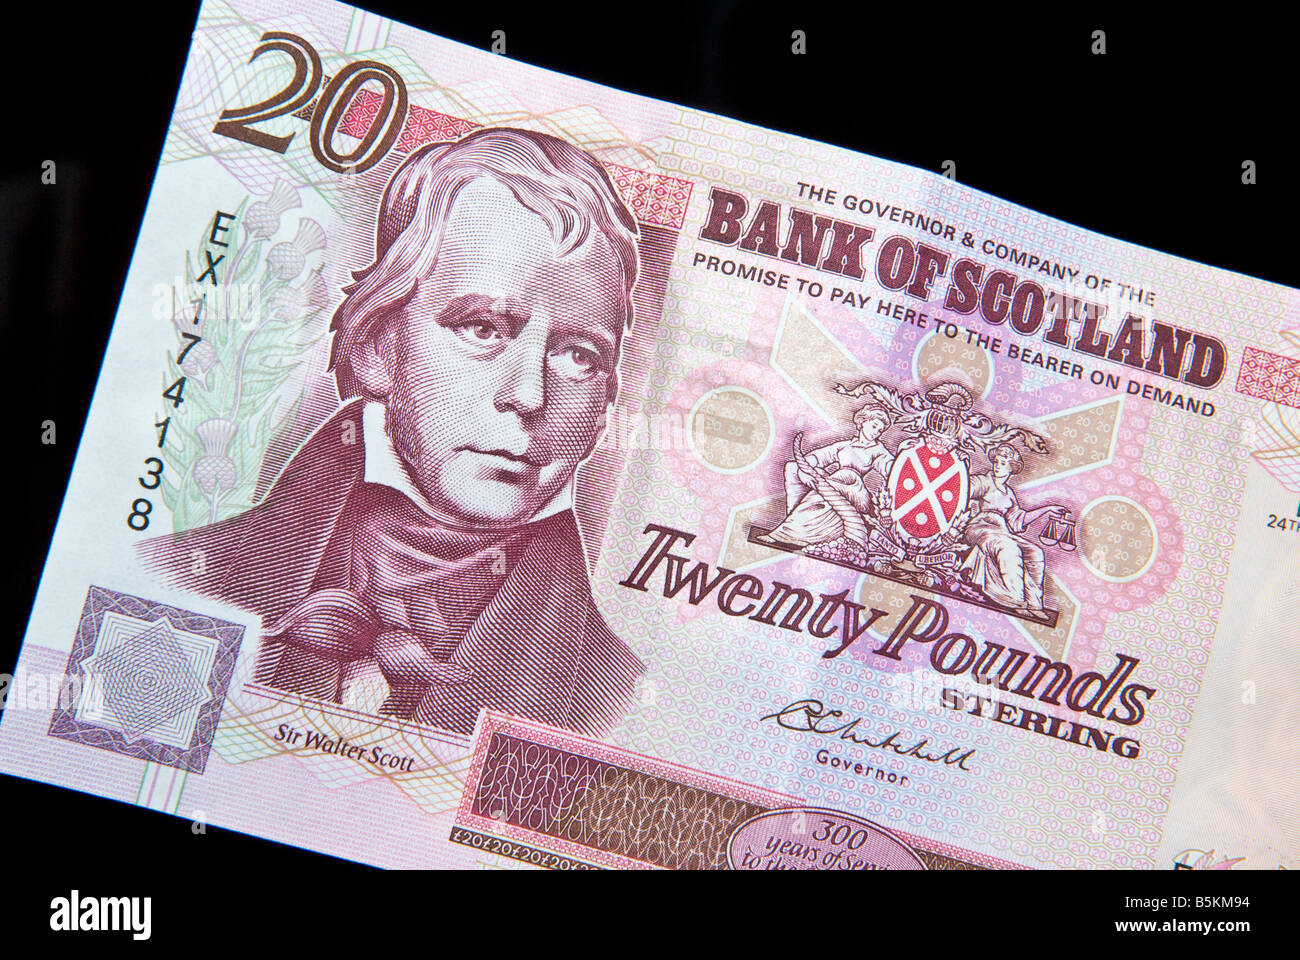 Bank of Scotland £20 pound note (front) Stock Photo